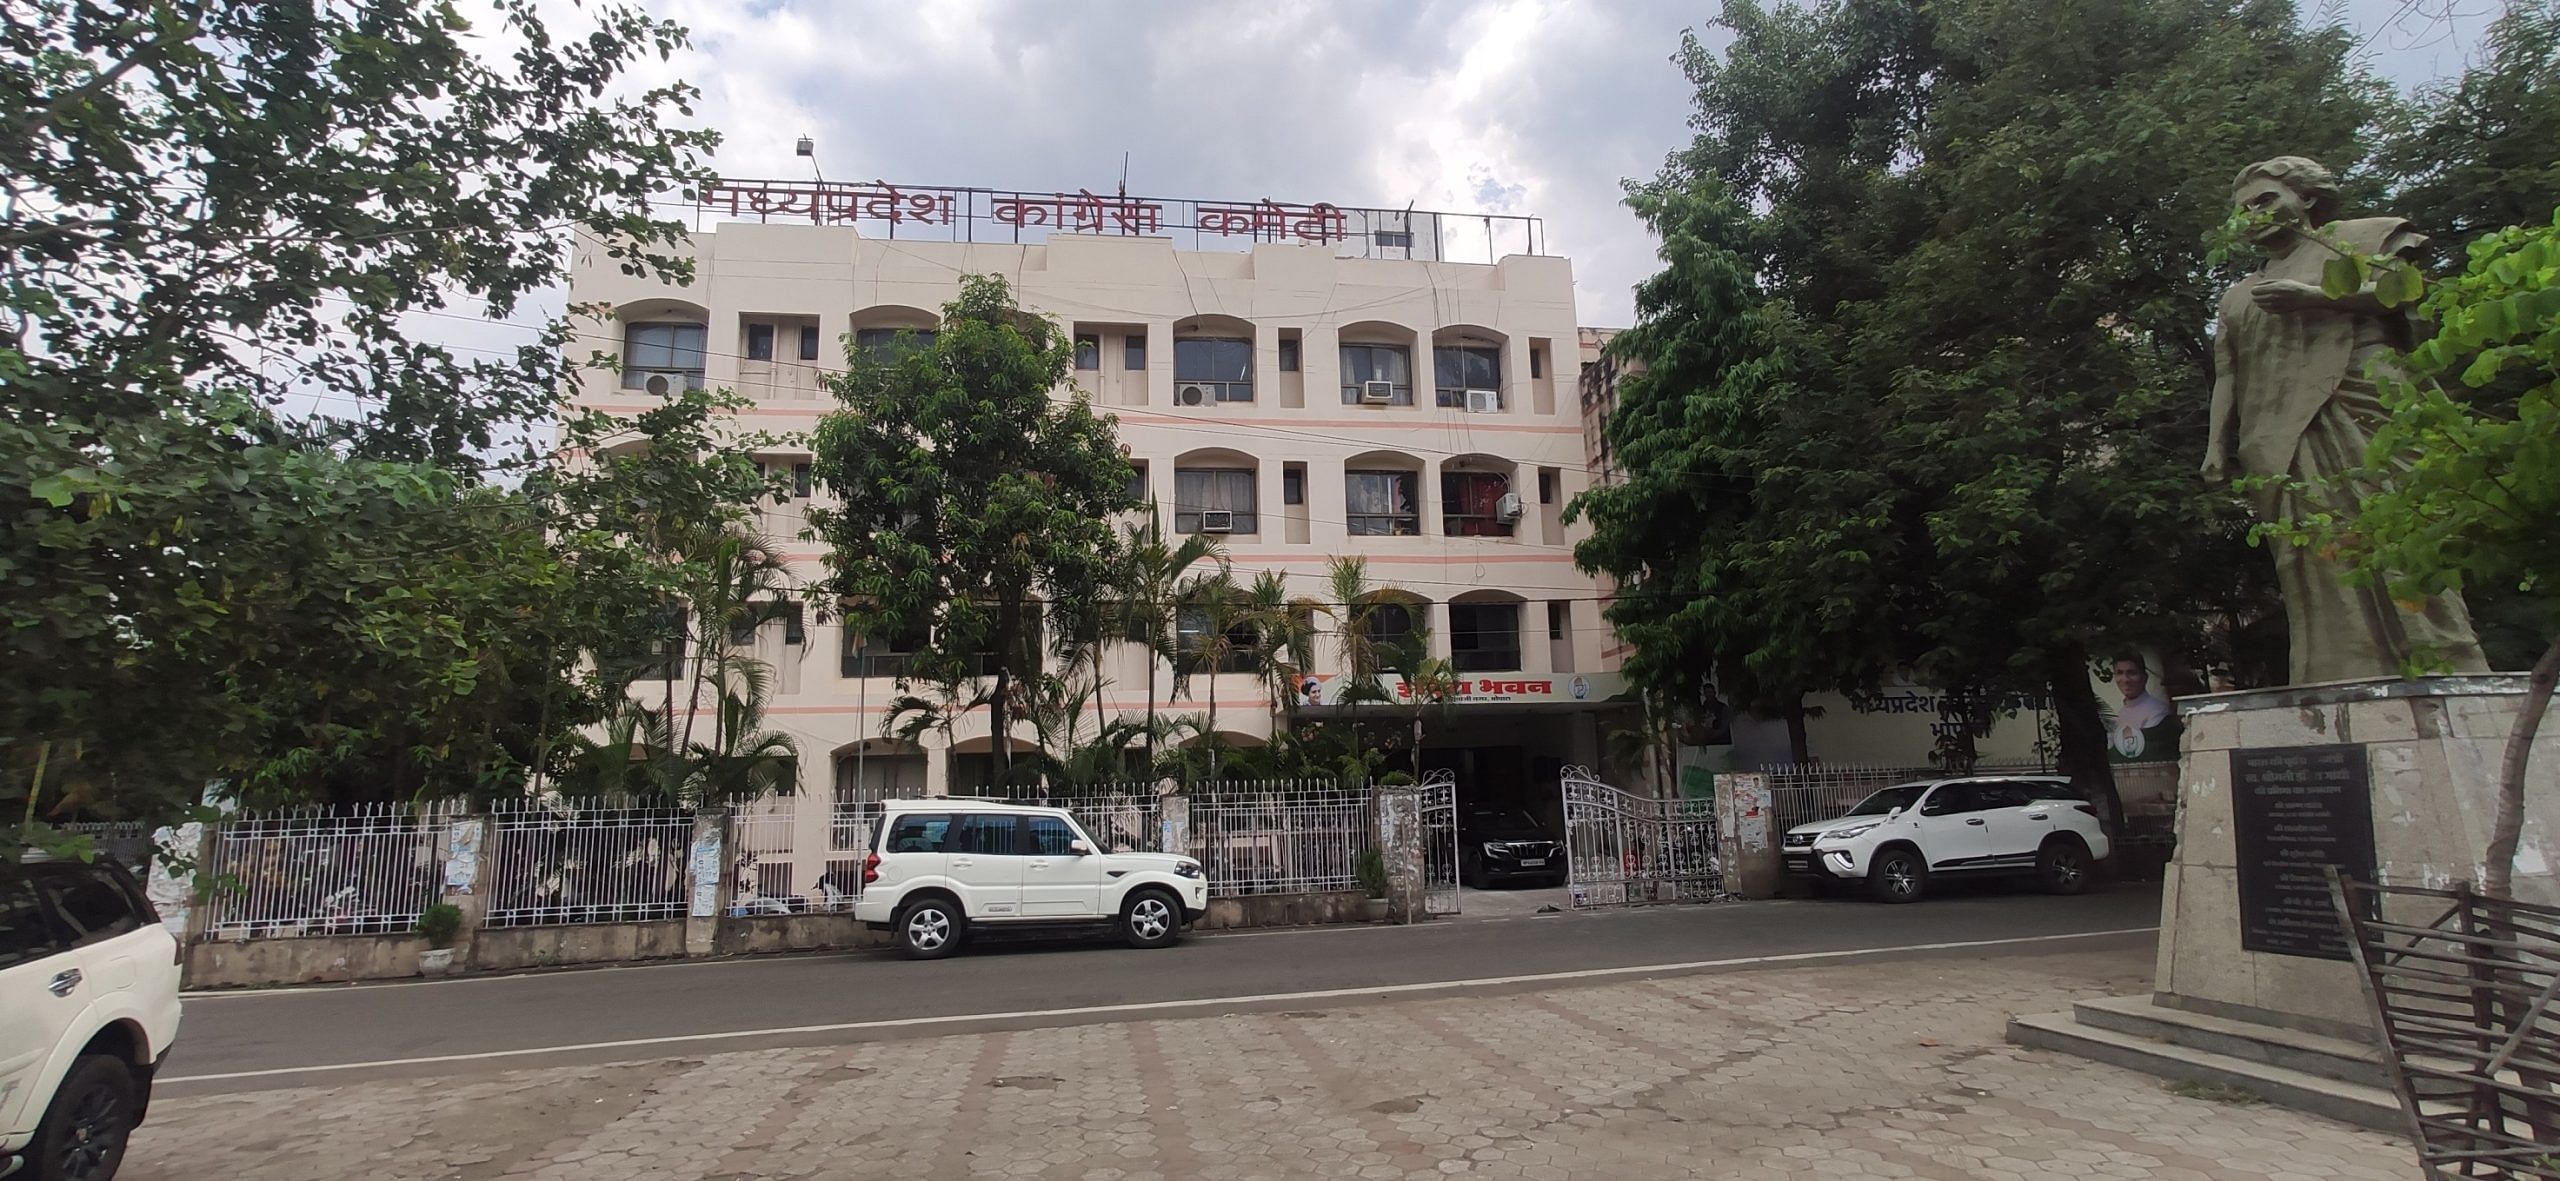 The MP Congress office building in Bhopal | Iram Siddique 